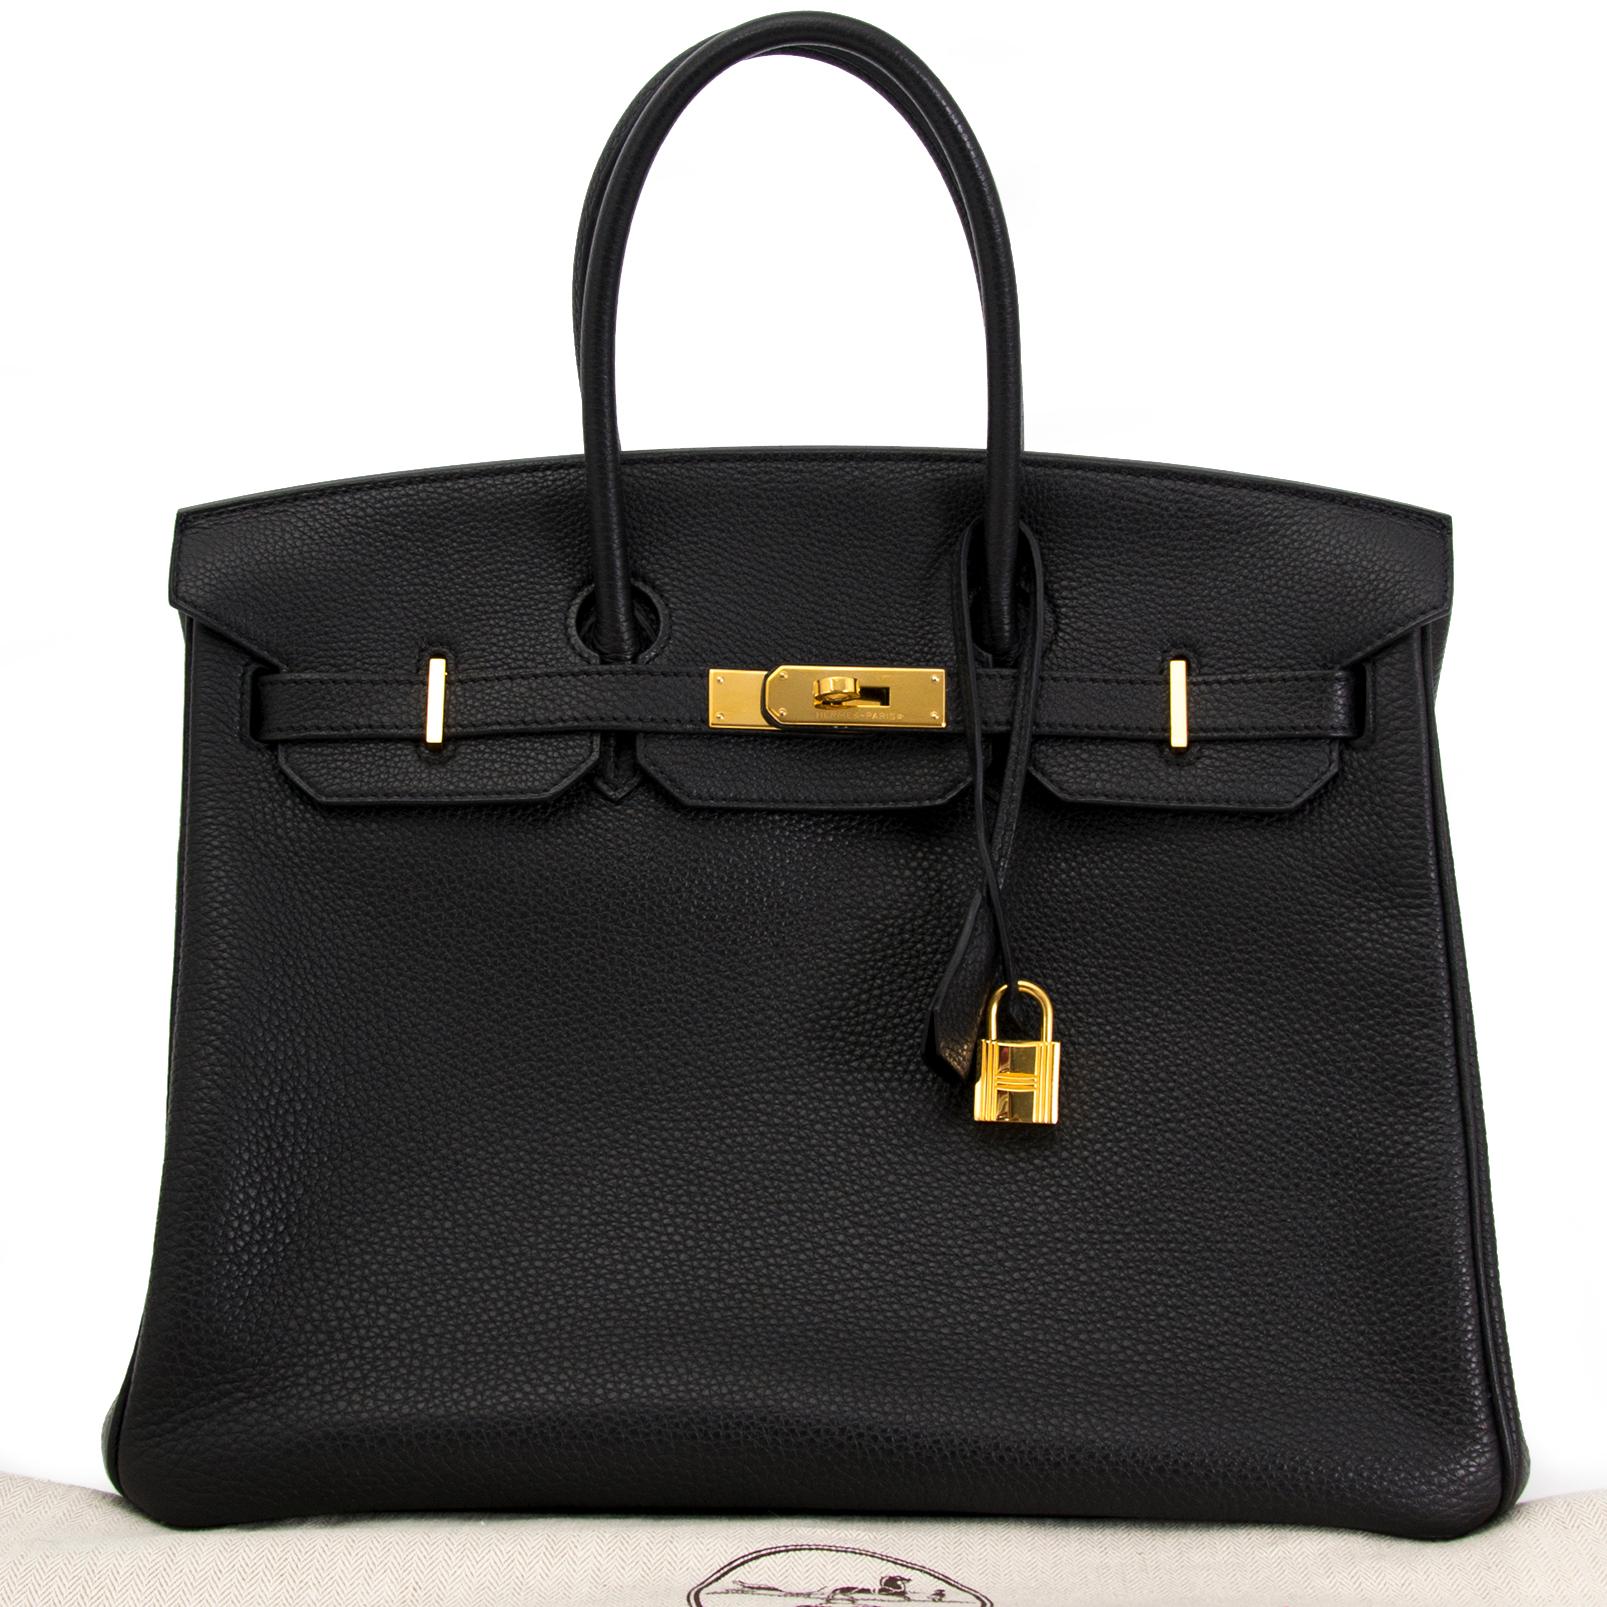 Get your hands on this gorgeous Birkin. made from togo leather, this bag is incredibly smooth to the touch and is almost completely scratch-resistant.

This bag is featured in black, making it versatile and perfect for any occasion.

Gold hardware